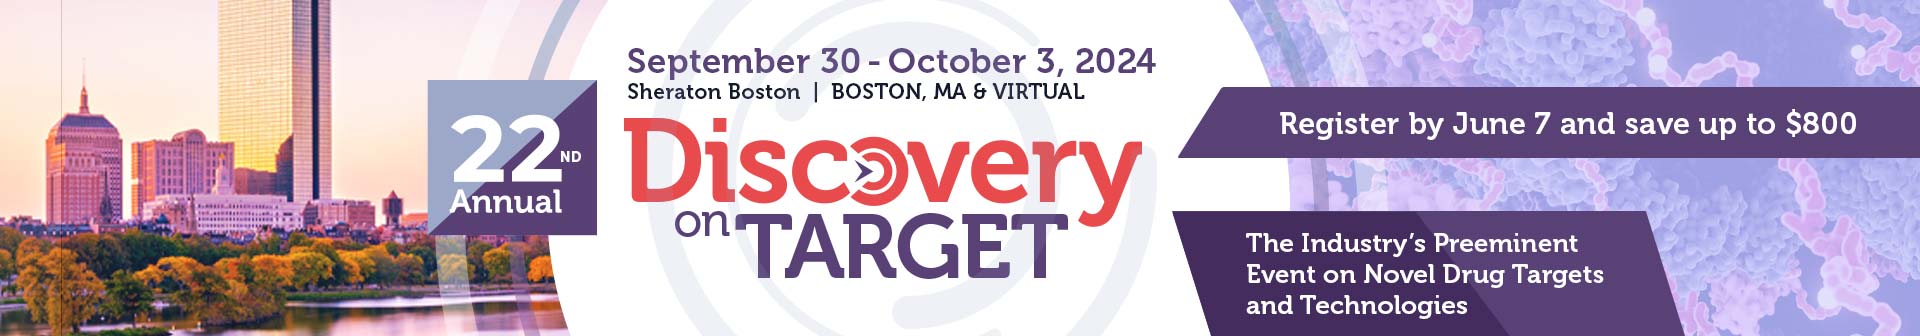 Discovery on Target Banner Image